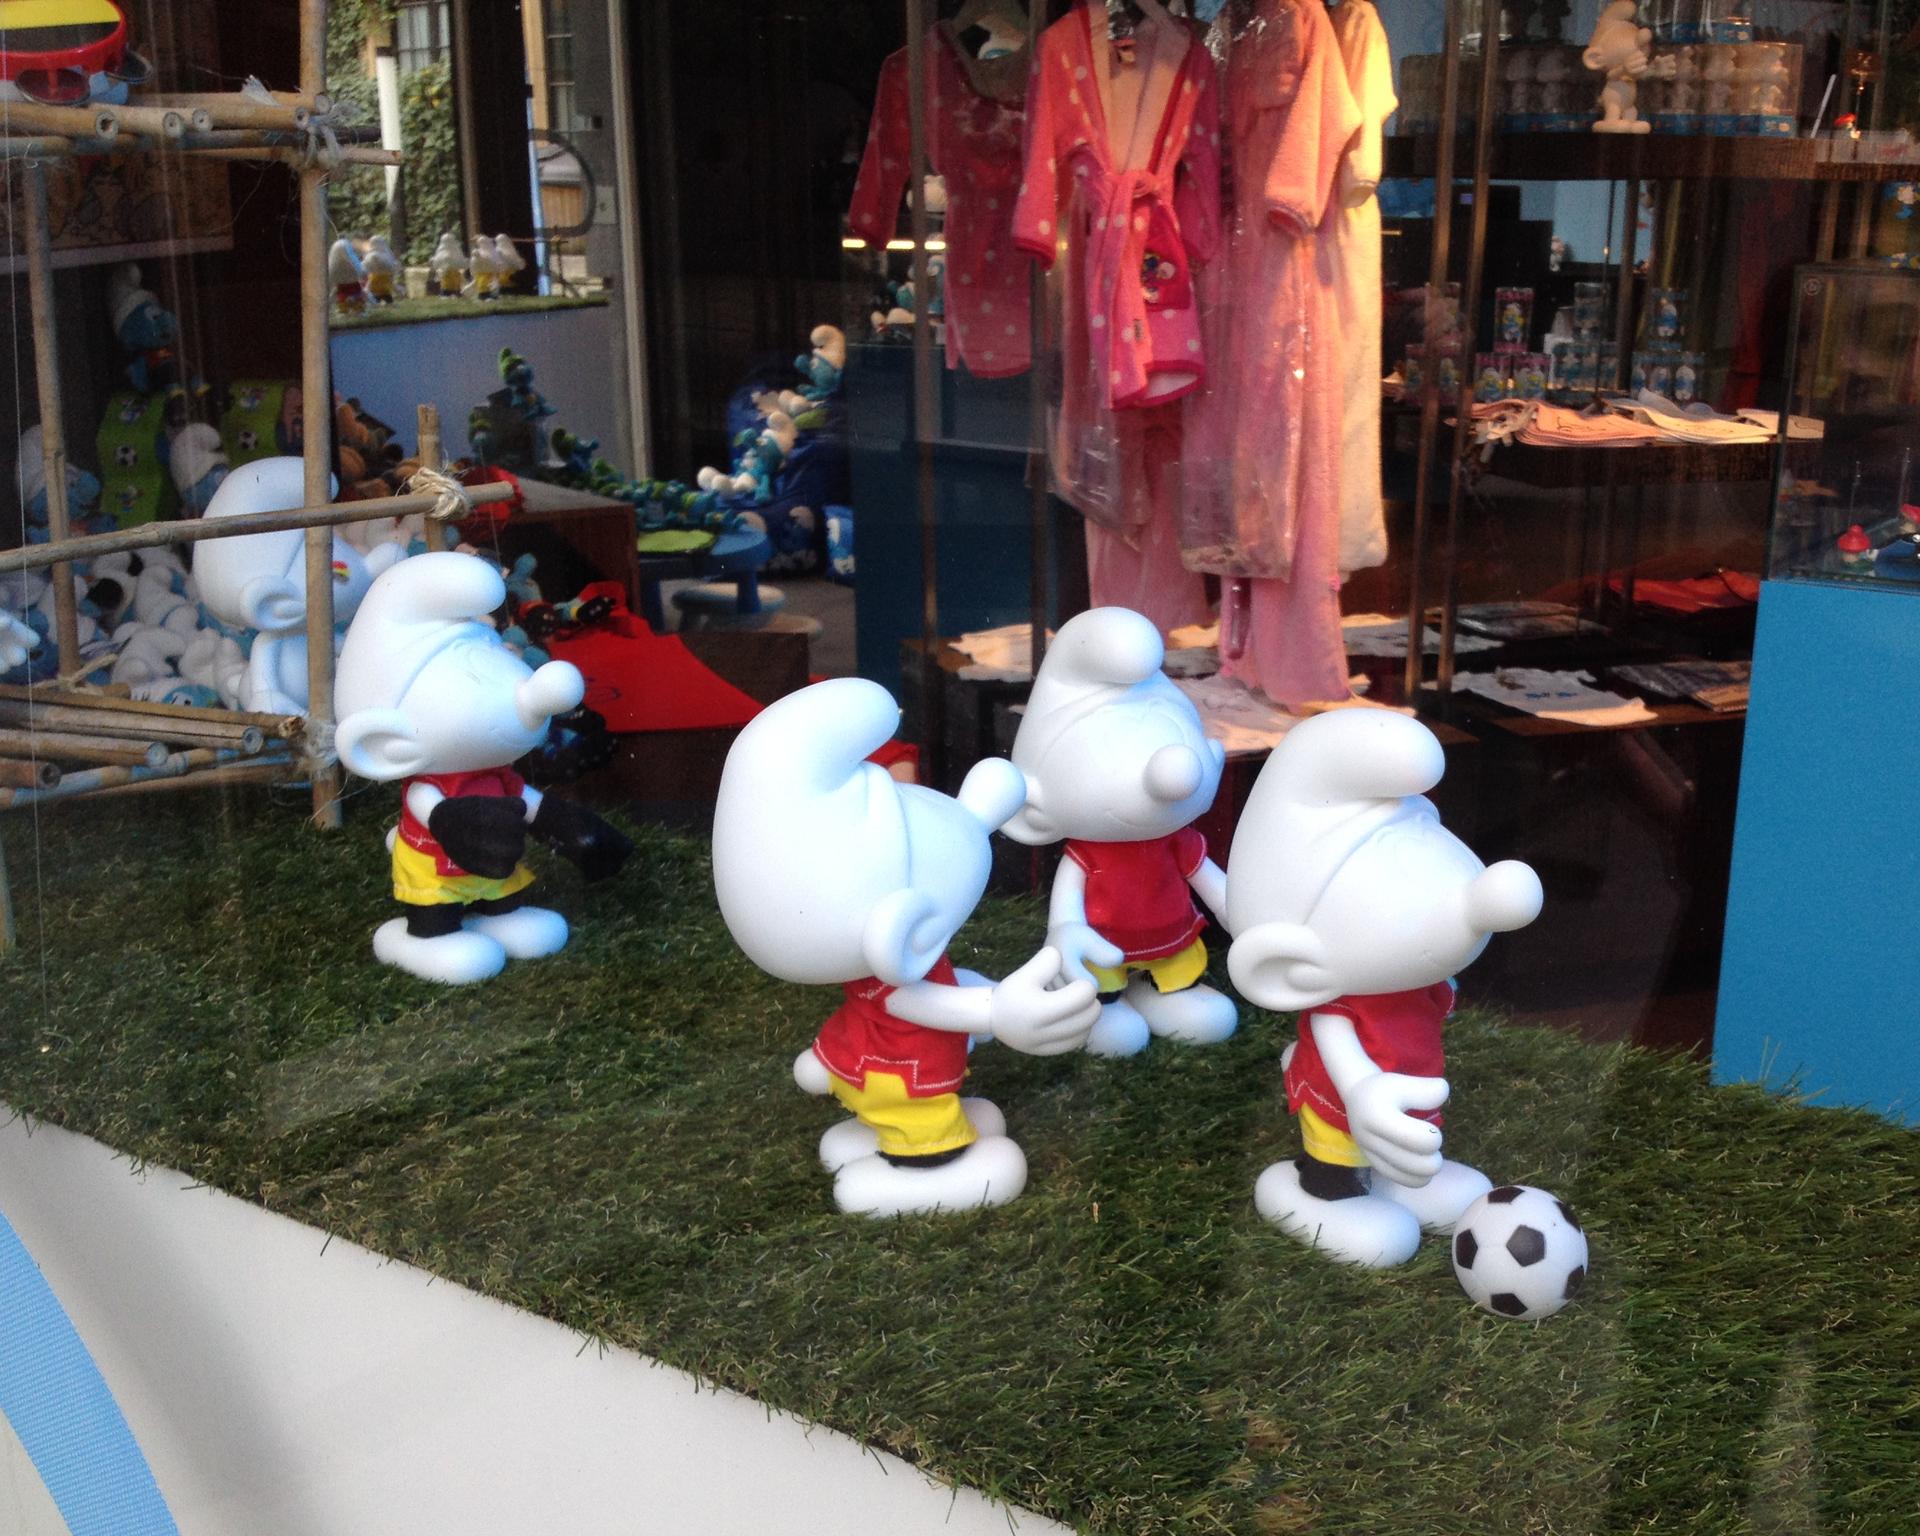 Even the Smurfs, a Belgian favorite, are getting into the soccer act in Brussels